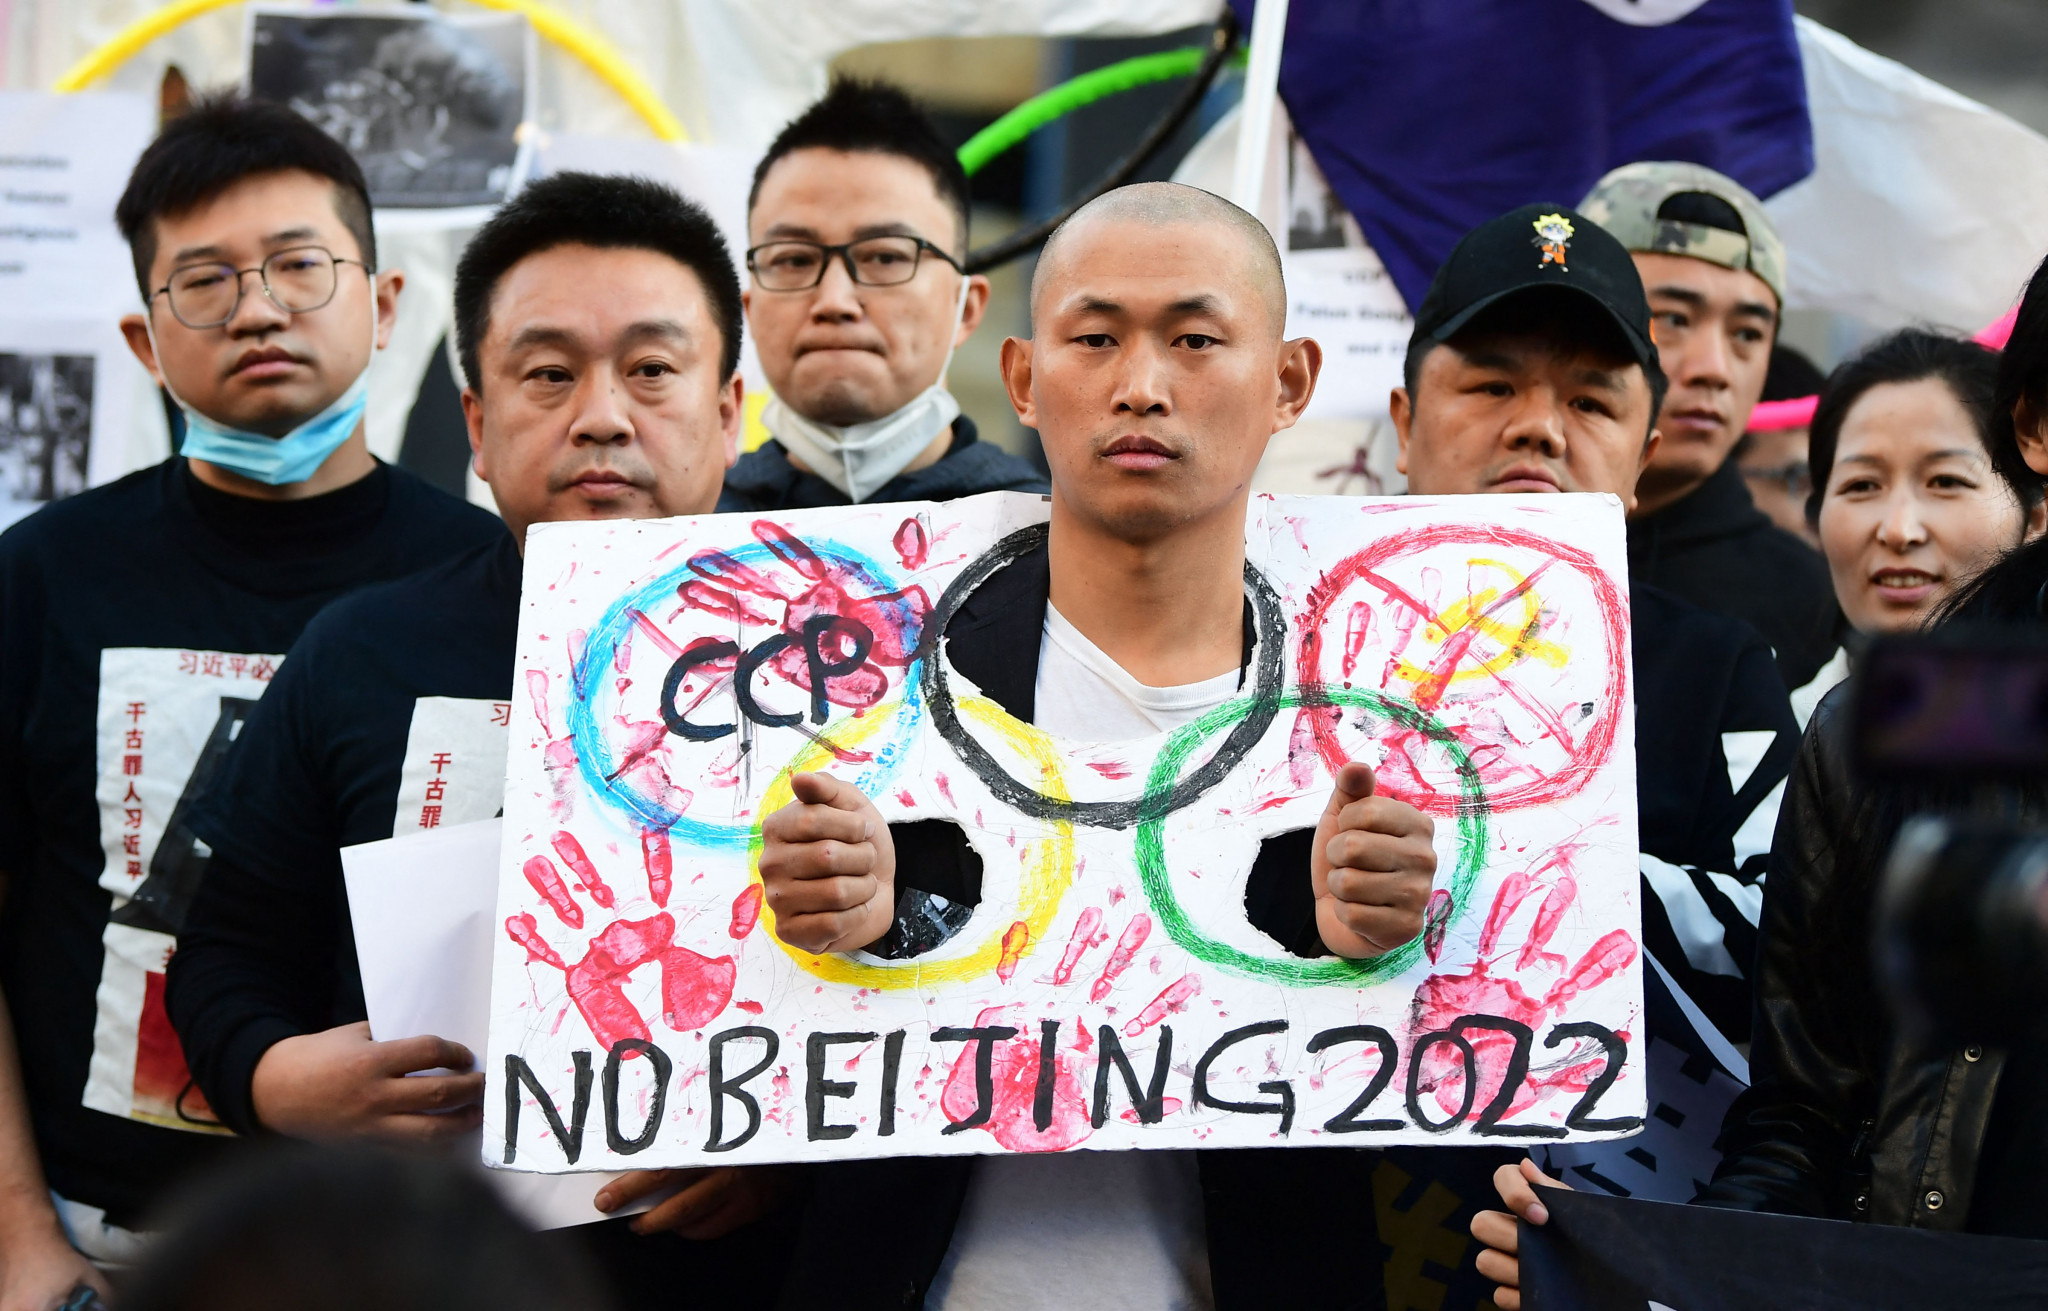 Groups across the world have called for a boycott of the 2022 Winter Olympic Games in Beijing to protest against China's alleged human rights abuses ©Getty Images